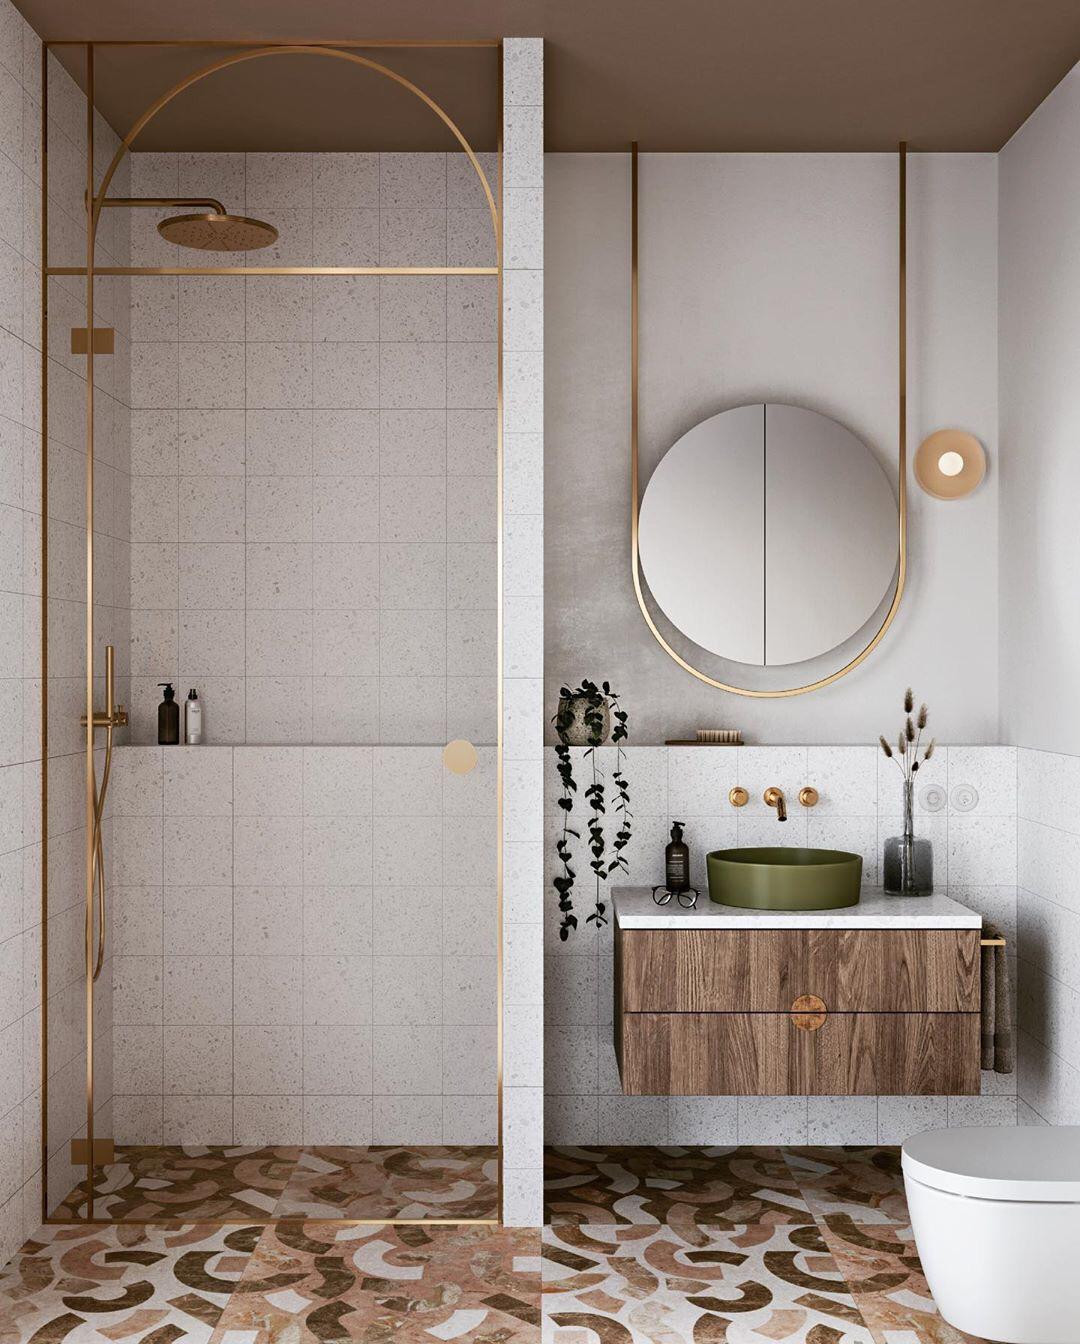 Simple & Clever Bathroom Design Ideas For Small Spaces - Design